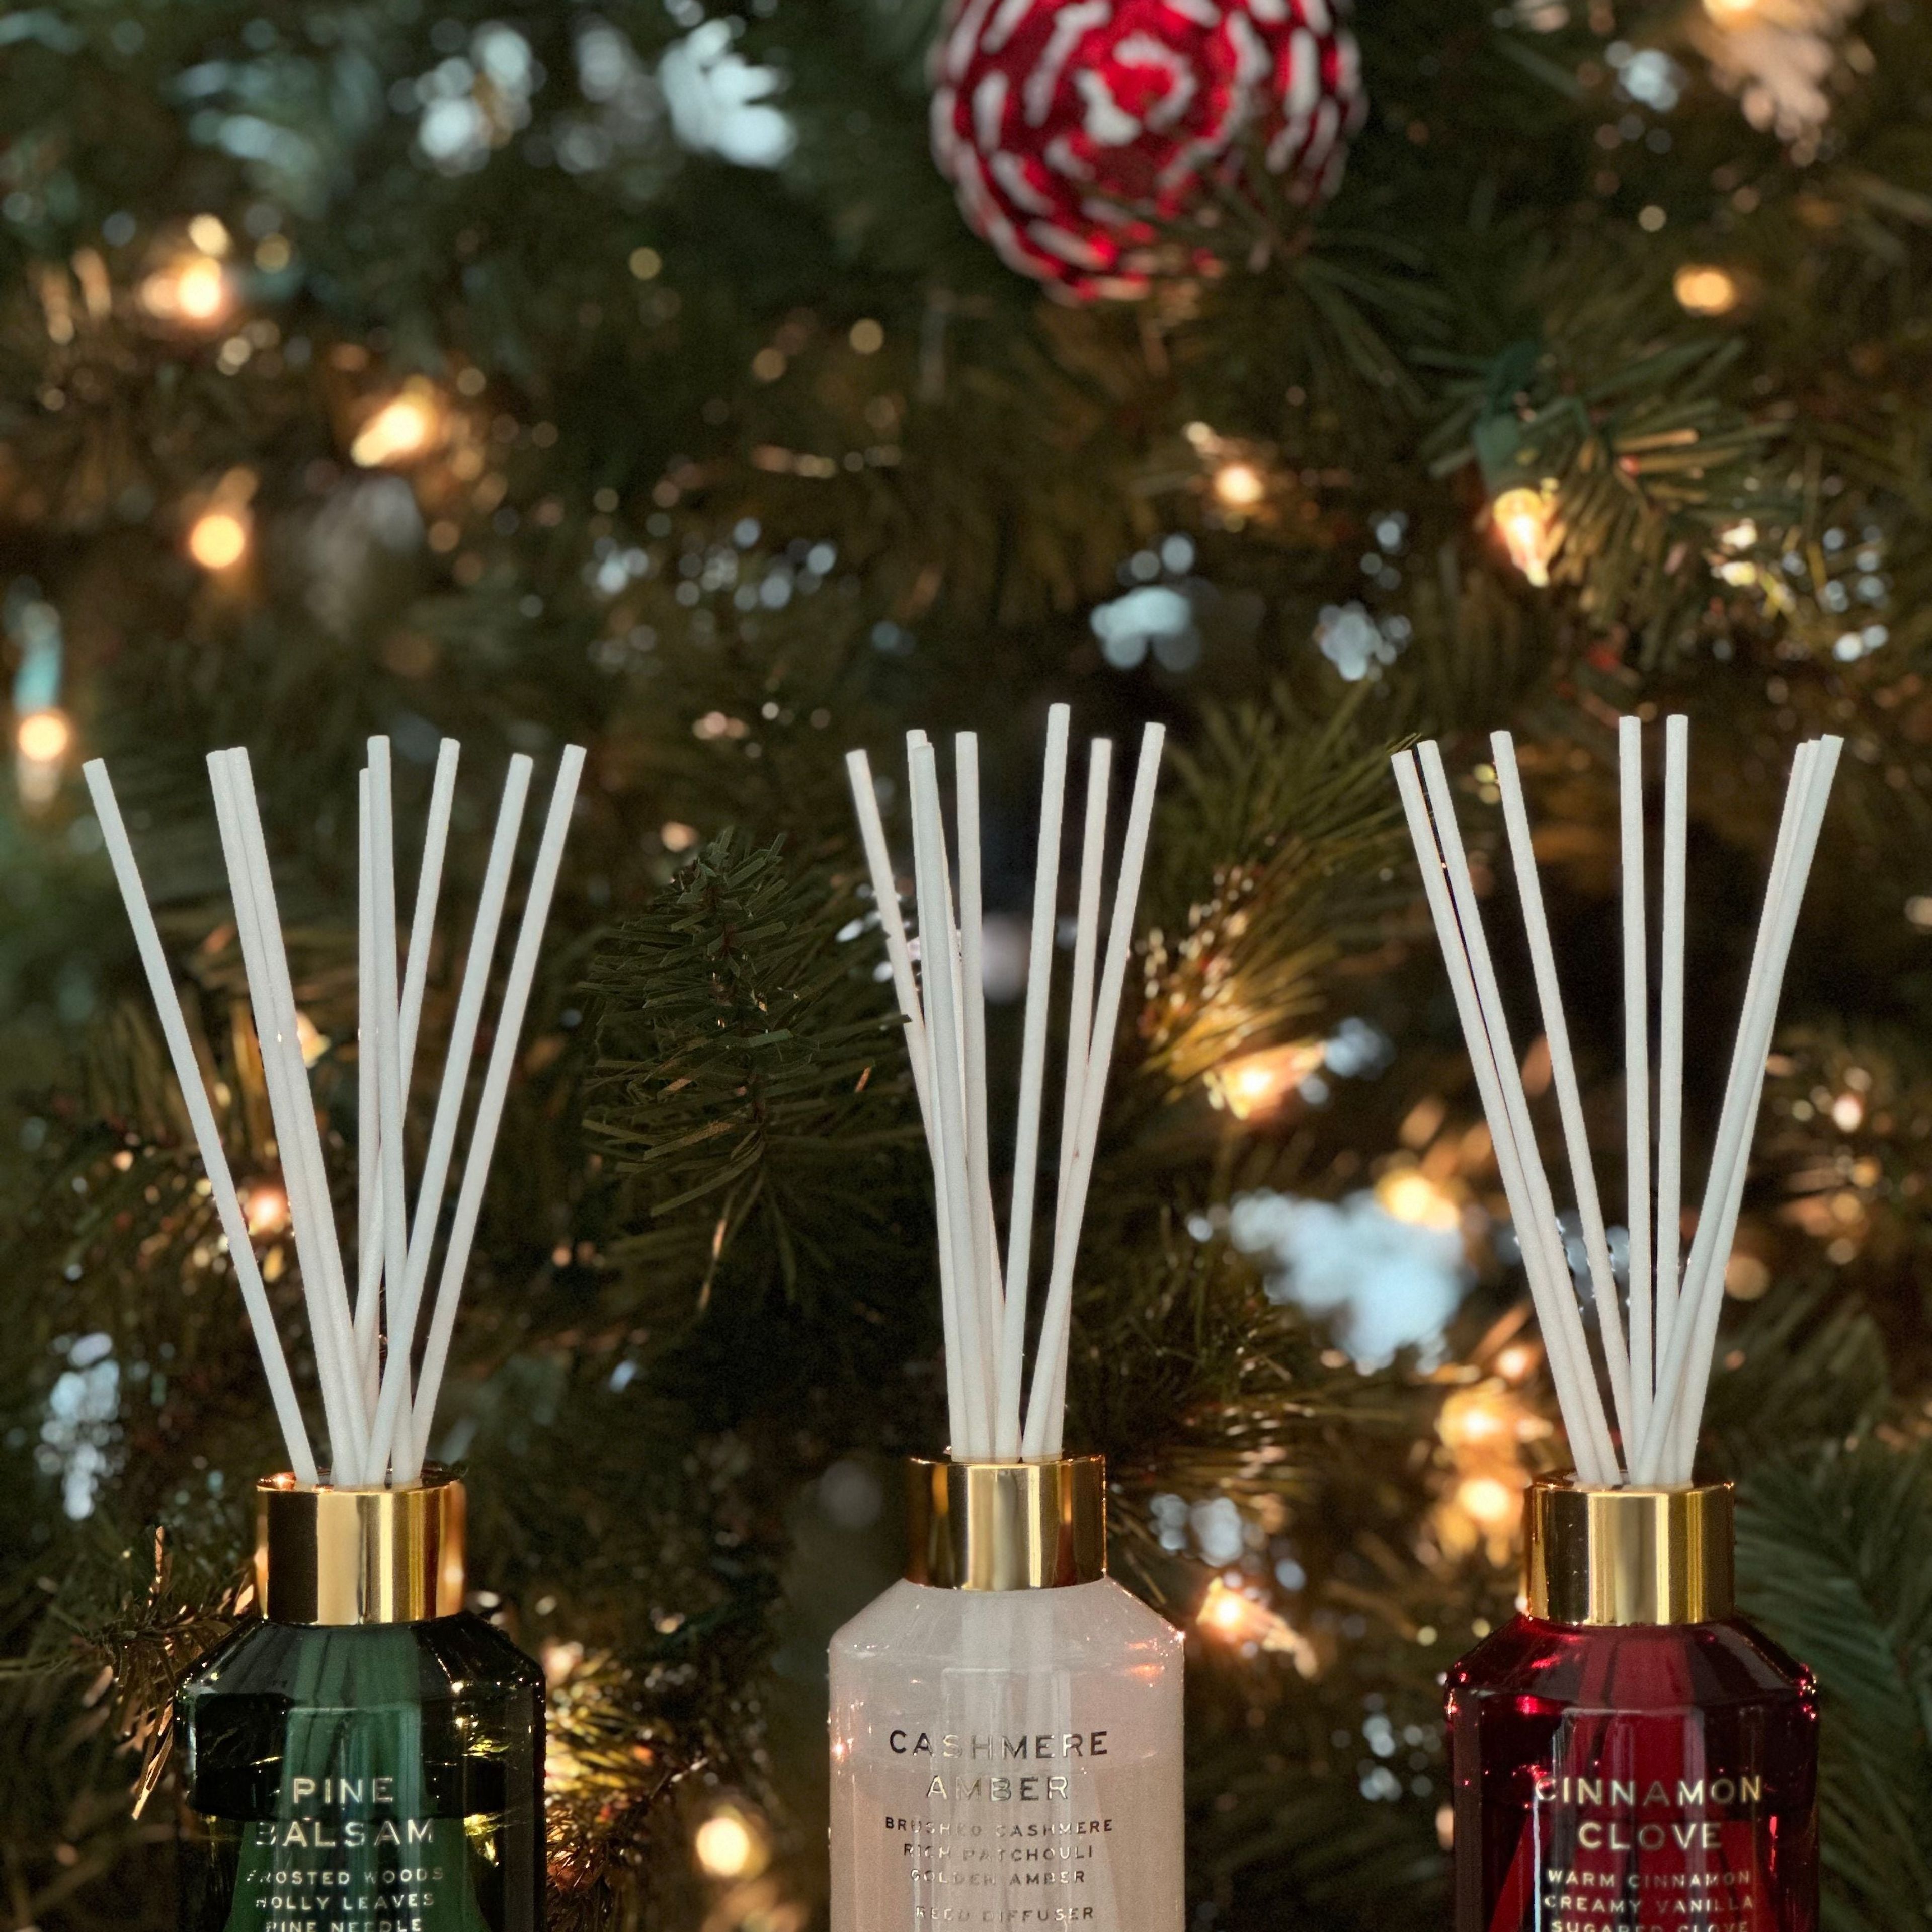 Cashmere Amber | Reed Diffuser